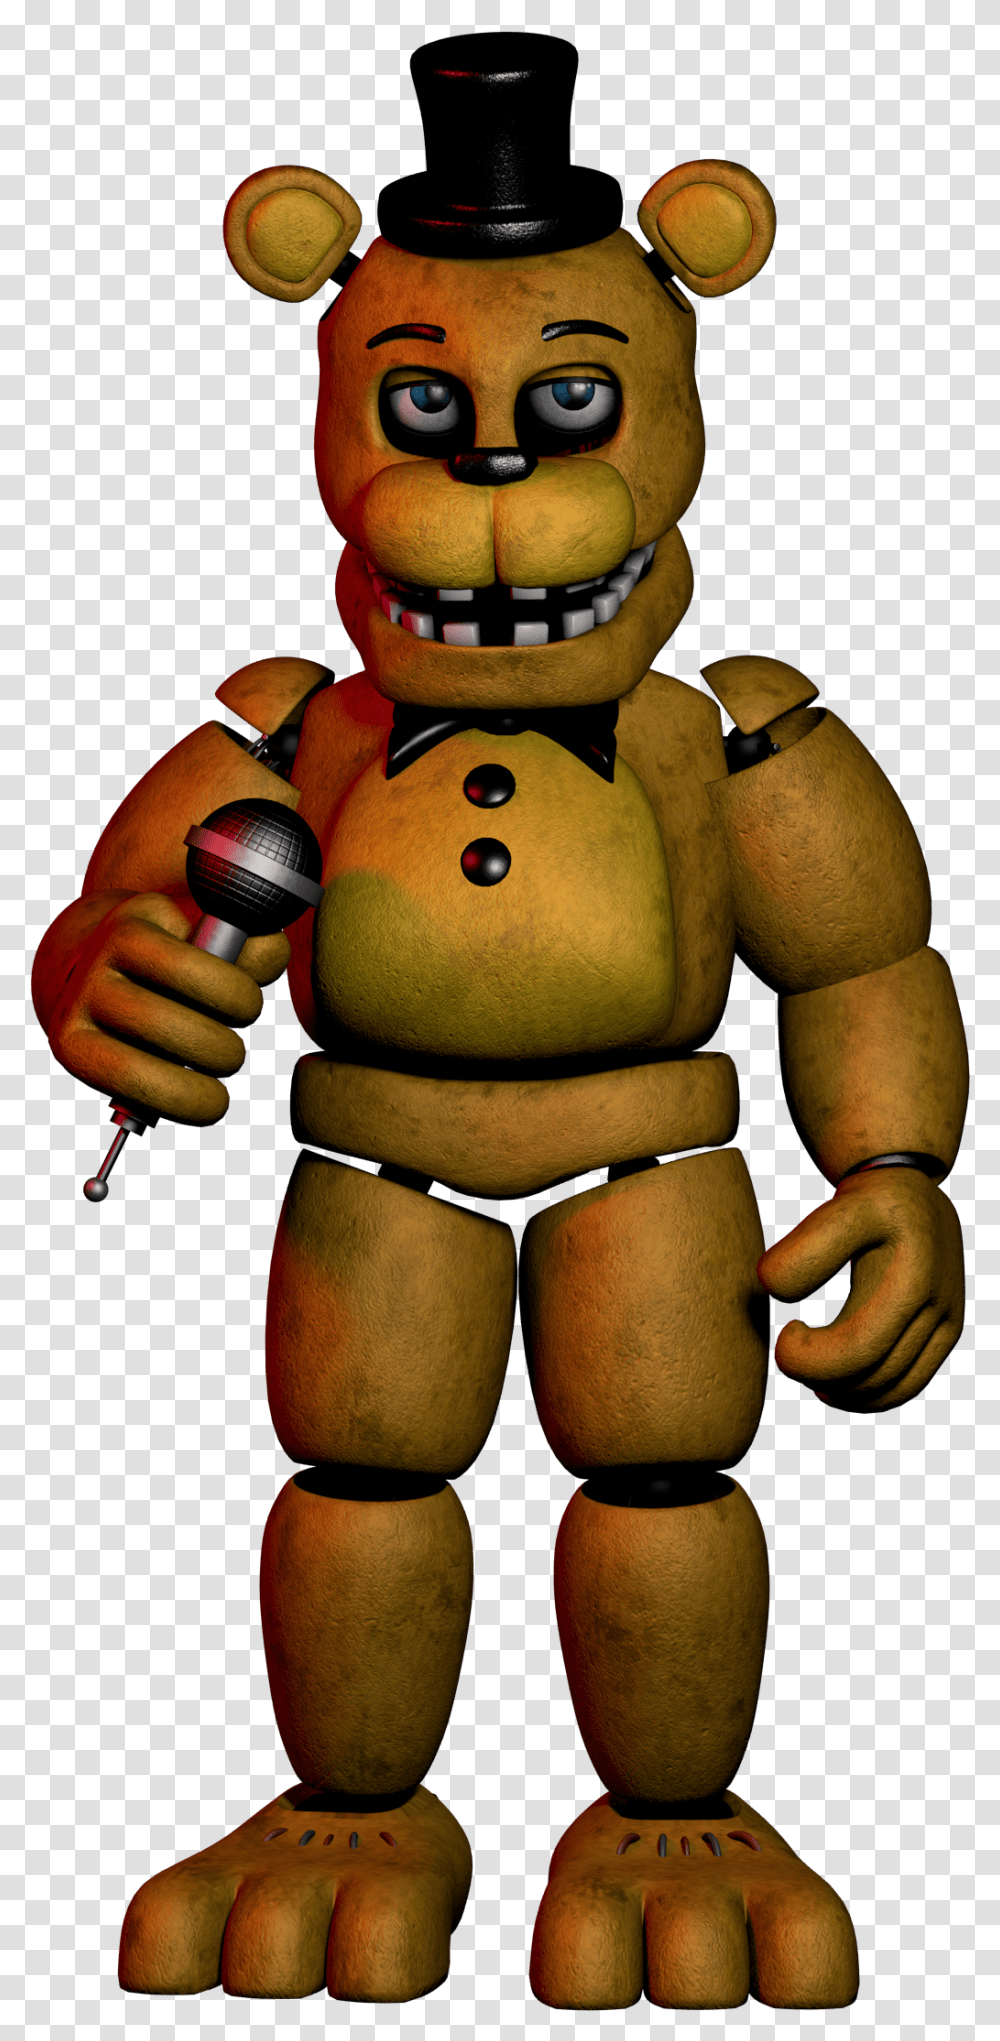 Golden Freddy Golden Freddy Popgoes, Robot, Figurine, Toy, Sweets Transparent Png